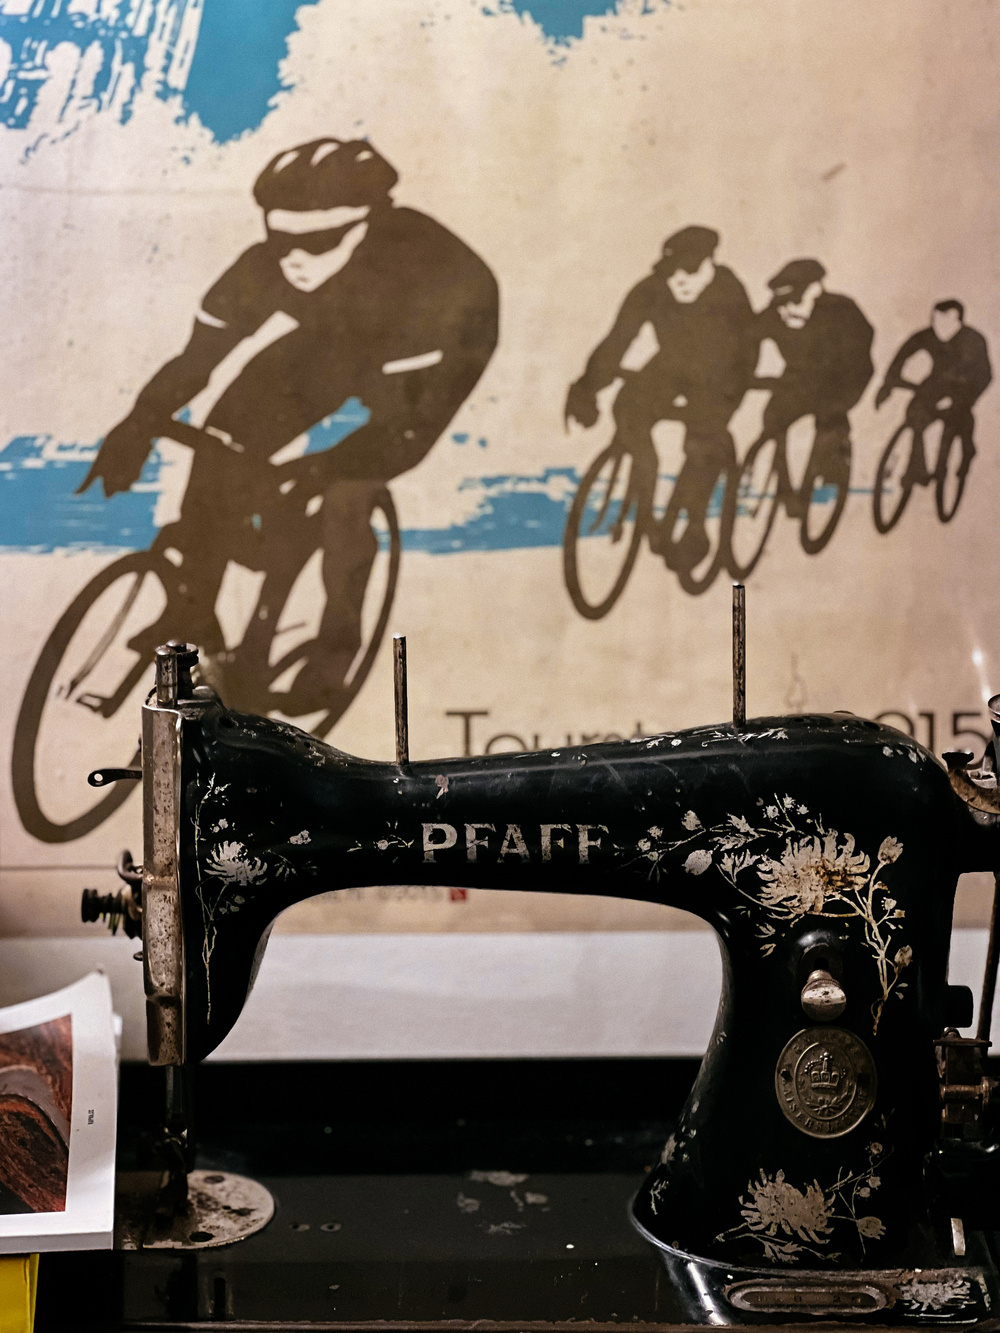 Vintage PFAFF sewing machine in the foreground with ornate decorations, placed against a backdrop of a large wall mural depicting cyclists in a race.